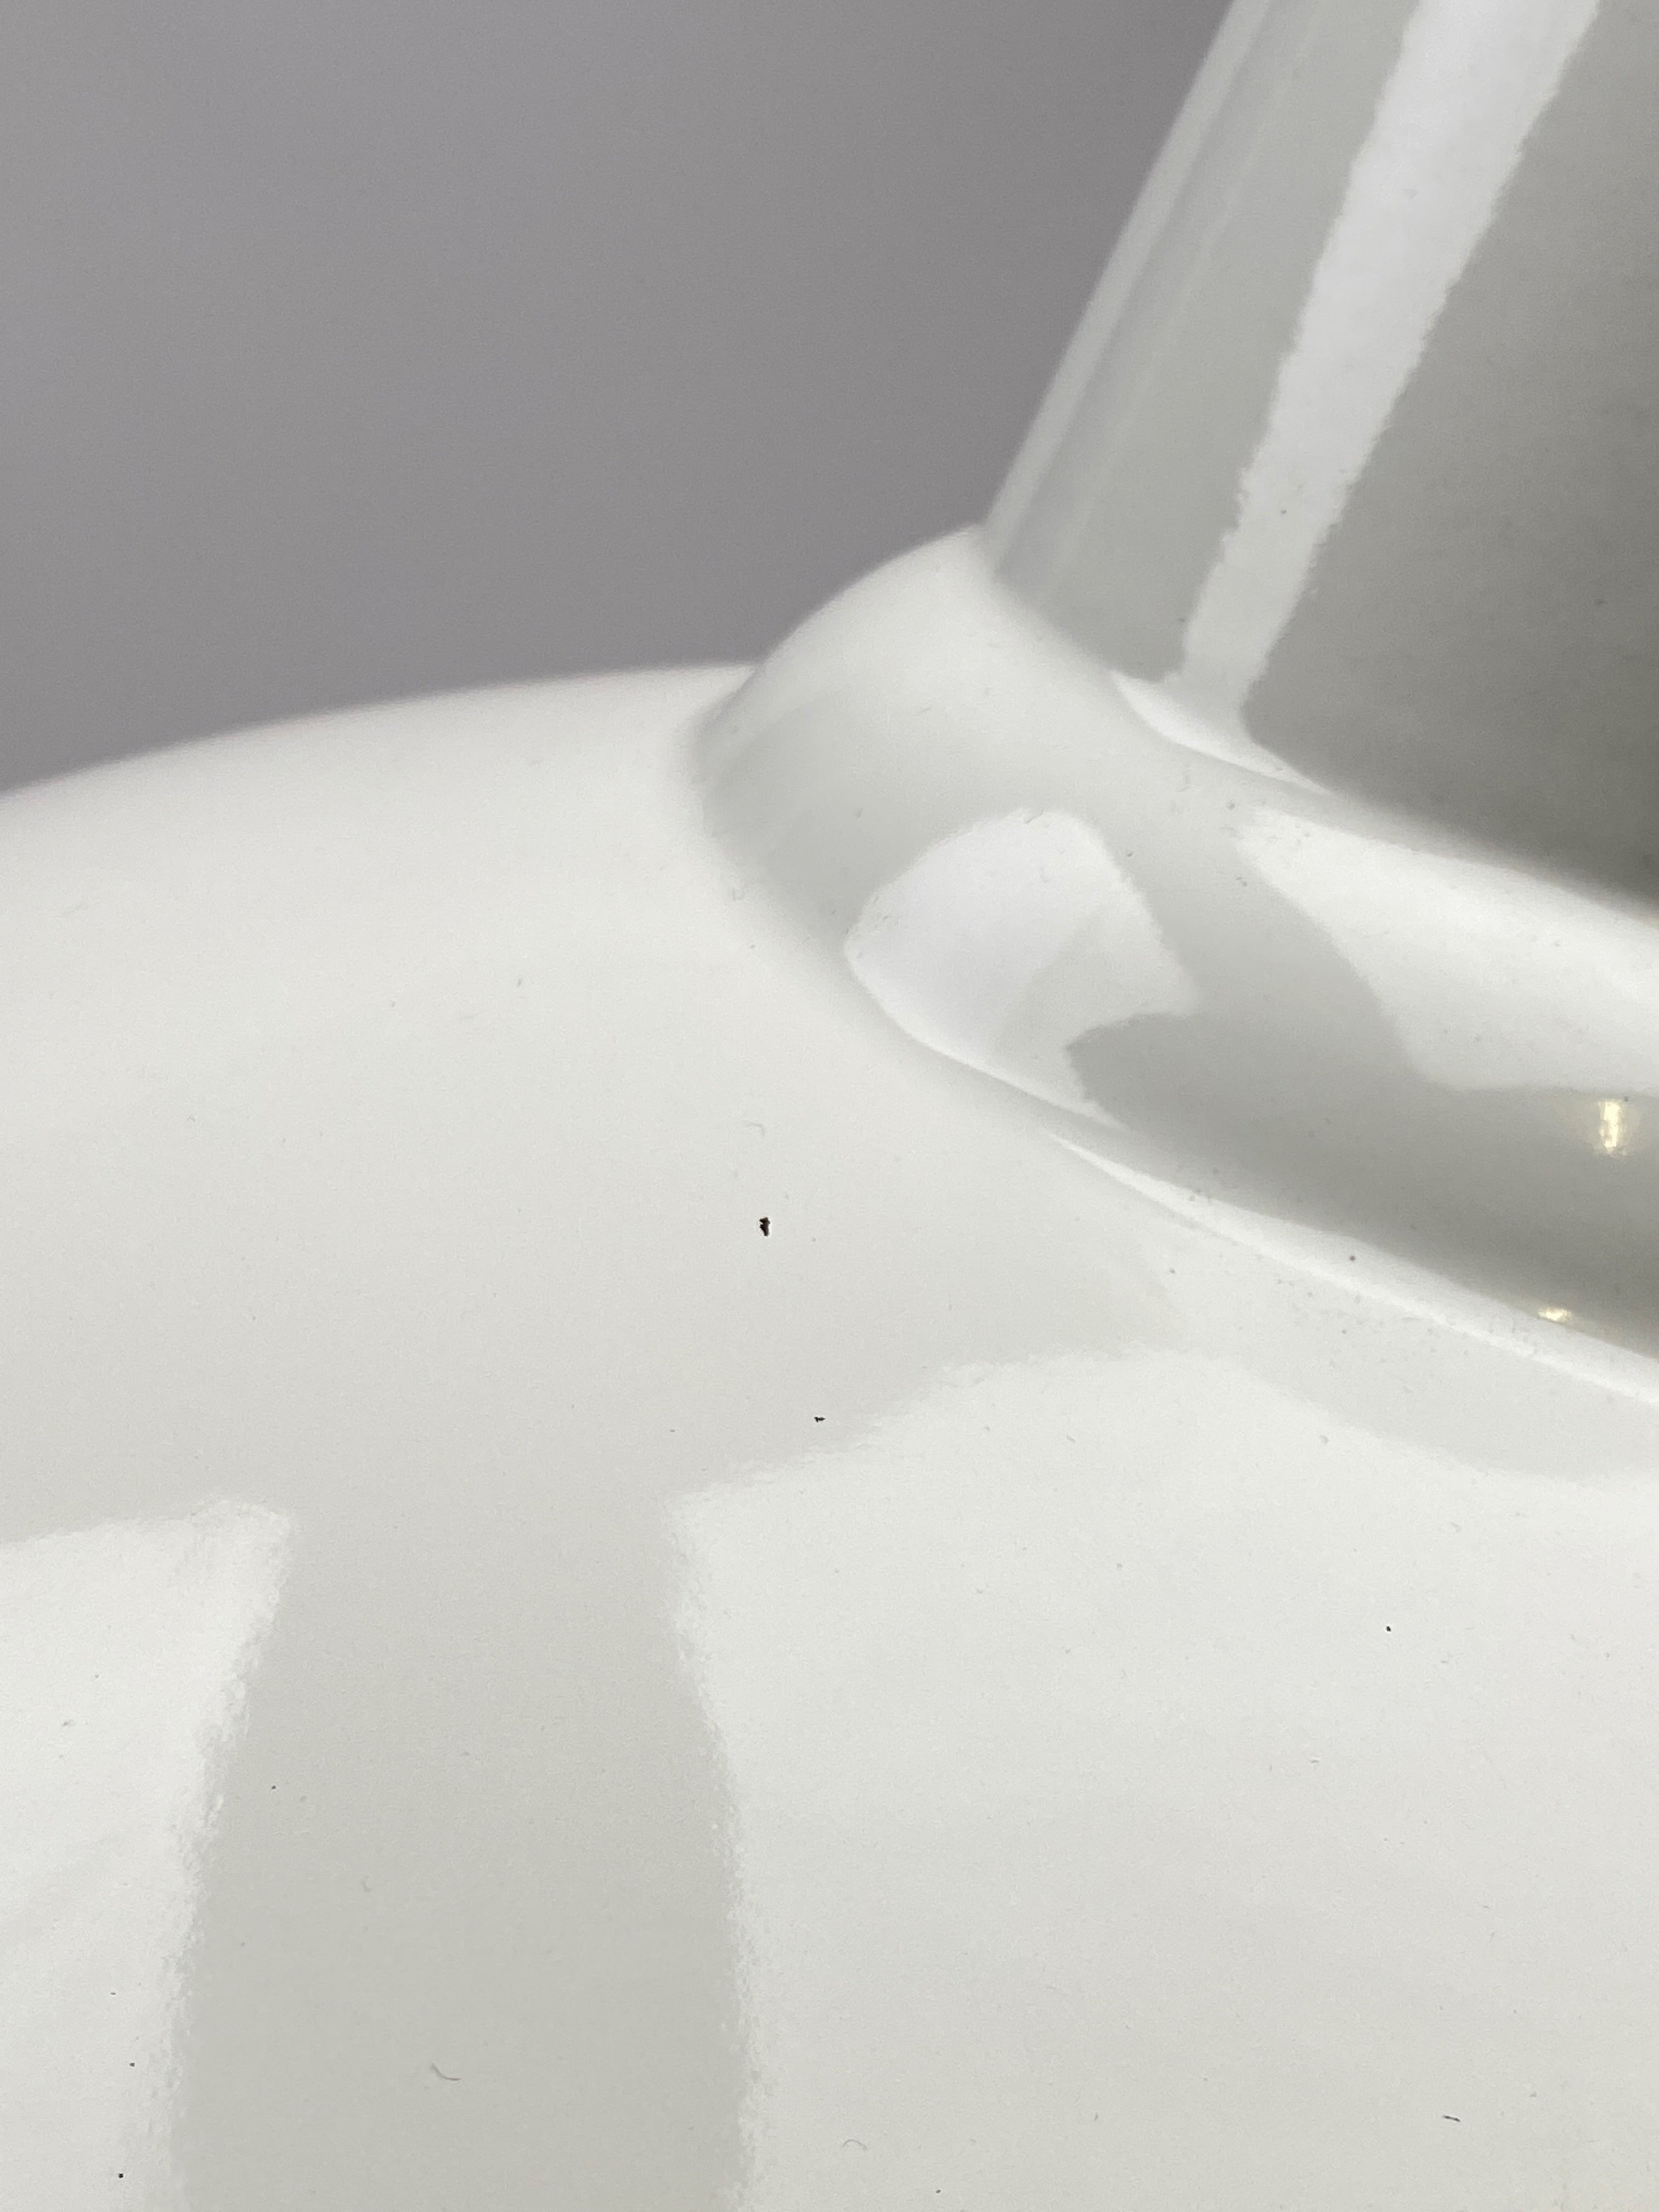 Example of Grade B damage that may be visible on a Worn Lighting Shade. Image shows minor chips / mark to the top enamel of a white shade.